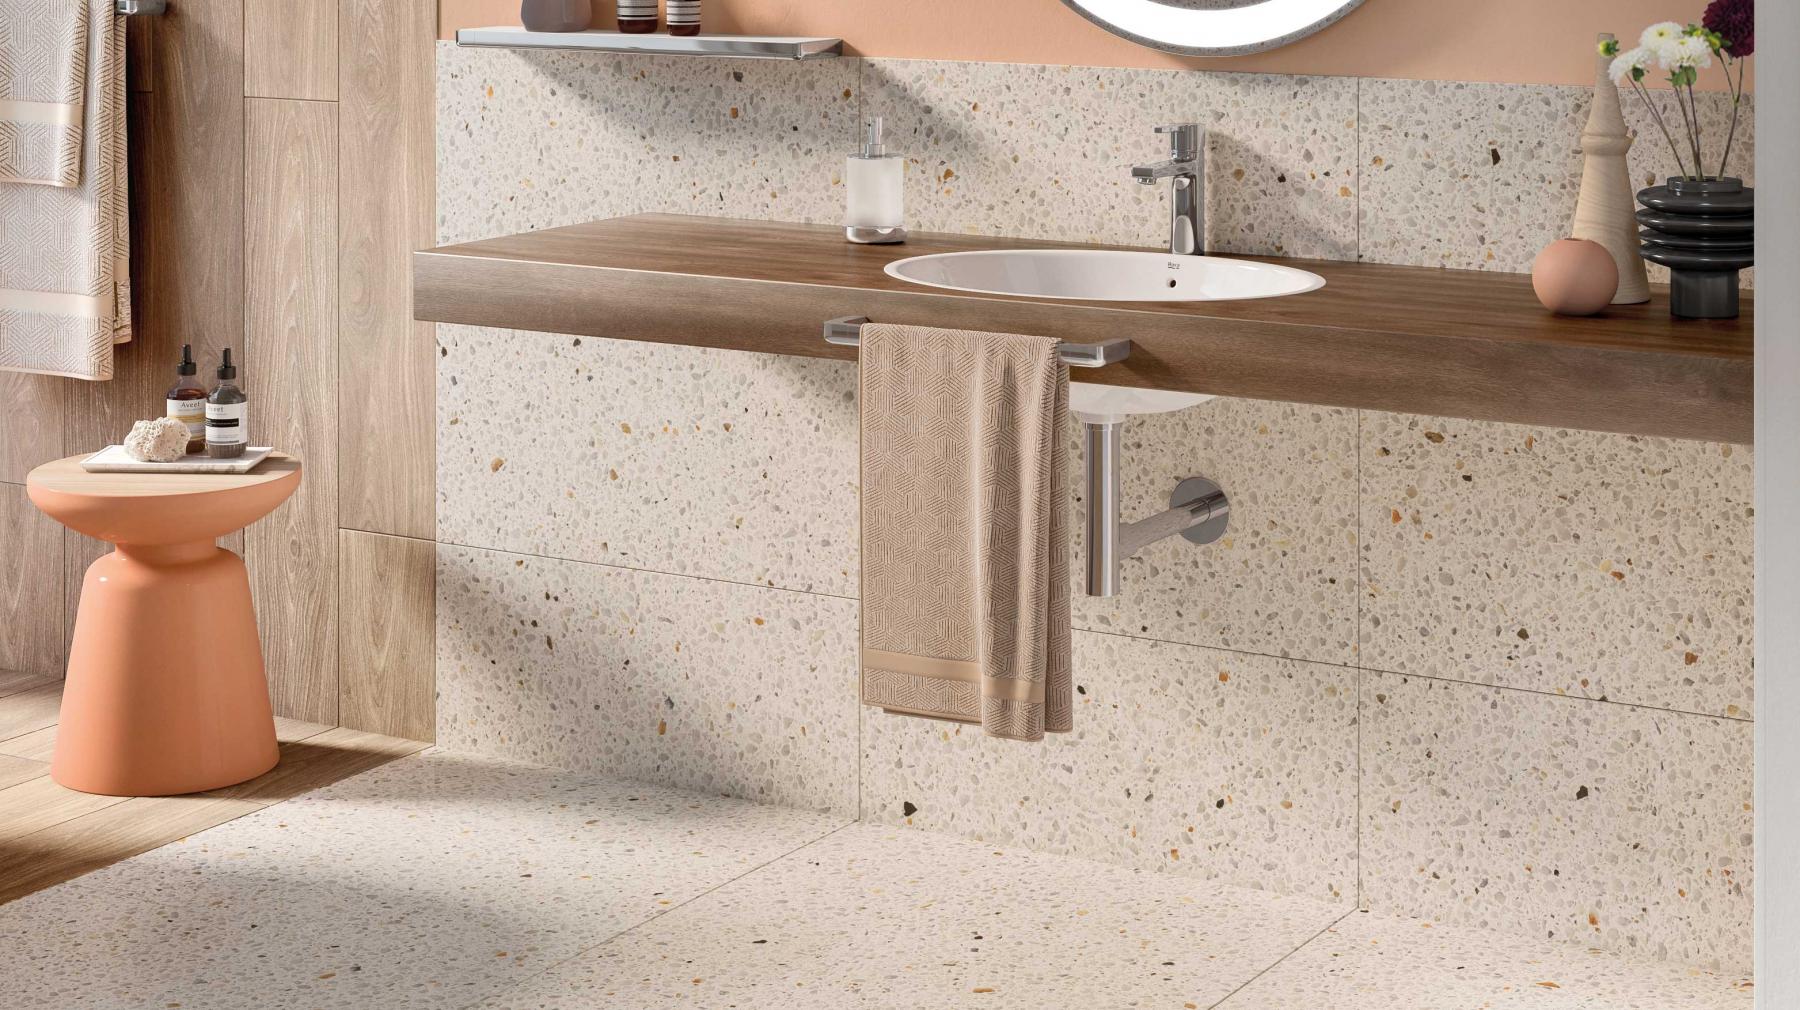 Find The Right Basin Under Counter Basin Or Wall Mounted Basin